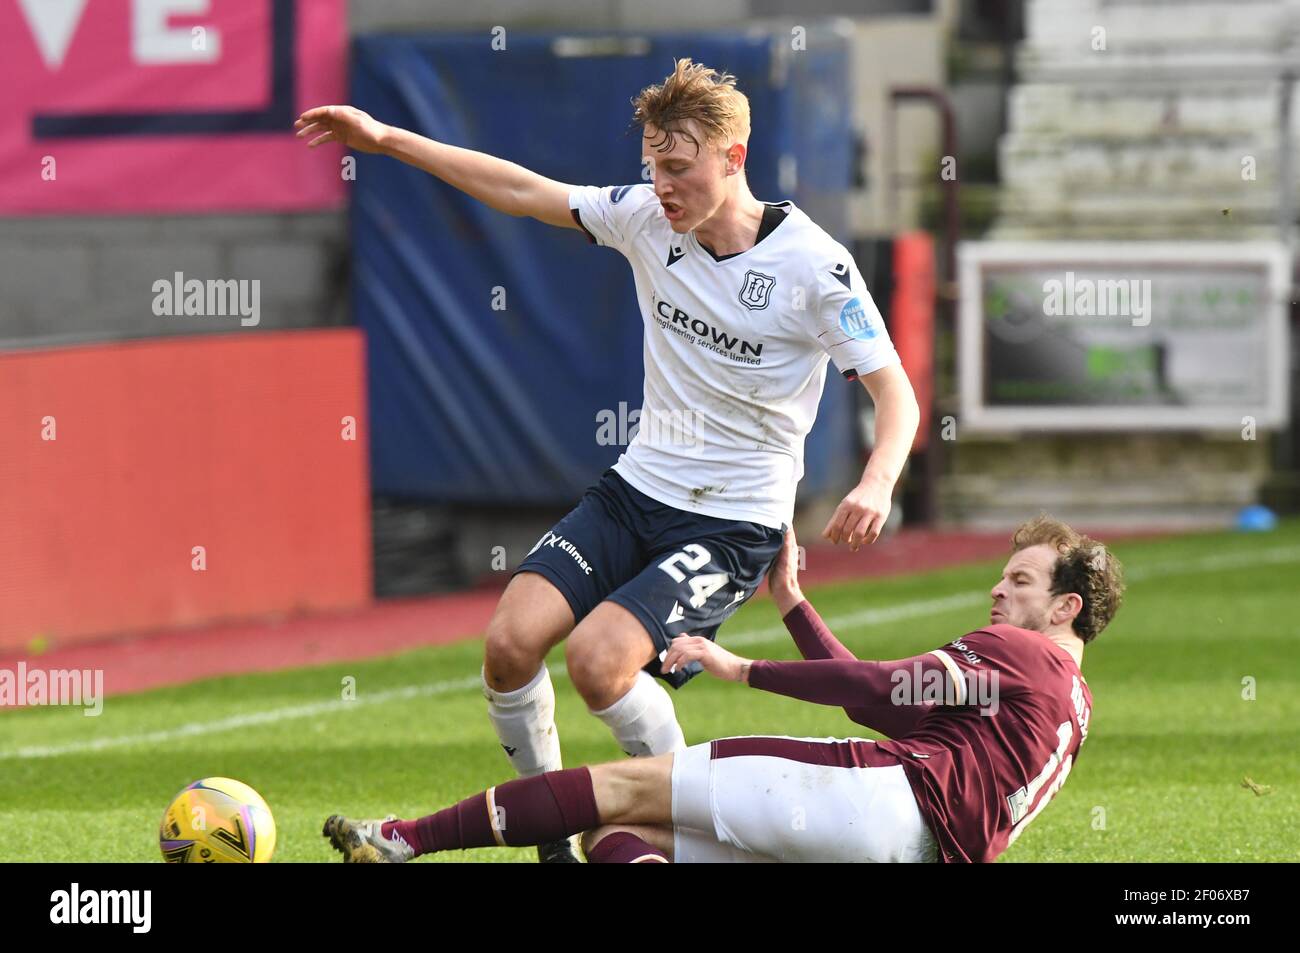 Tynecastle Park, Edinburgh, Scotland. UK 6TH March-21. Scottish  Championship Match .Hearts vs Dundee . Hearts Andy Halliday tackle on  Dundee midfielder, Max Anderson,(24) Credit: eric mccowat/Alamy Live News  Stock Photo - Alamy